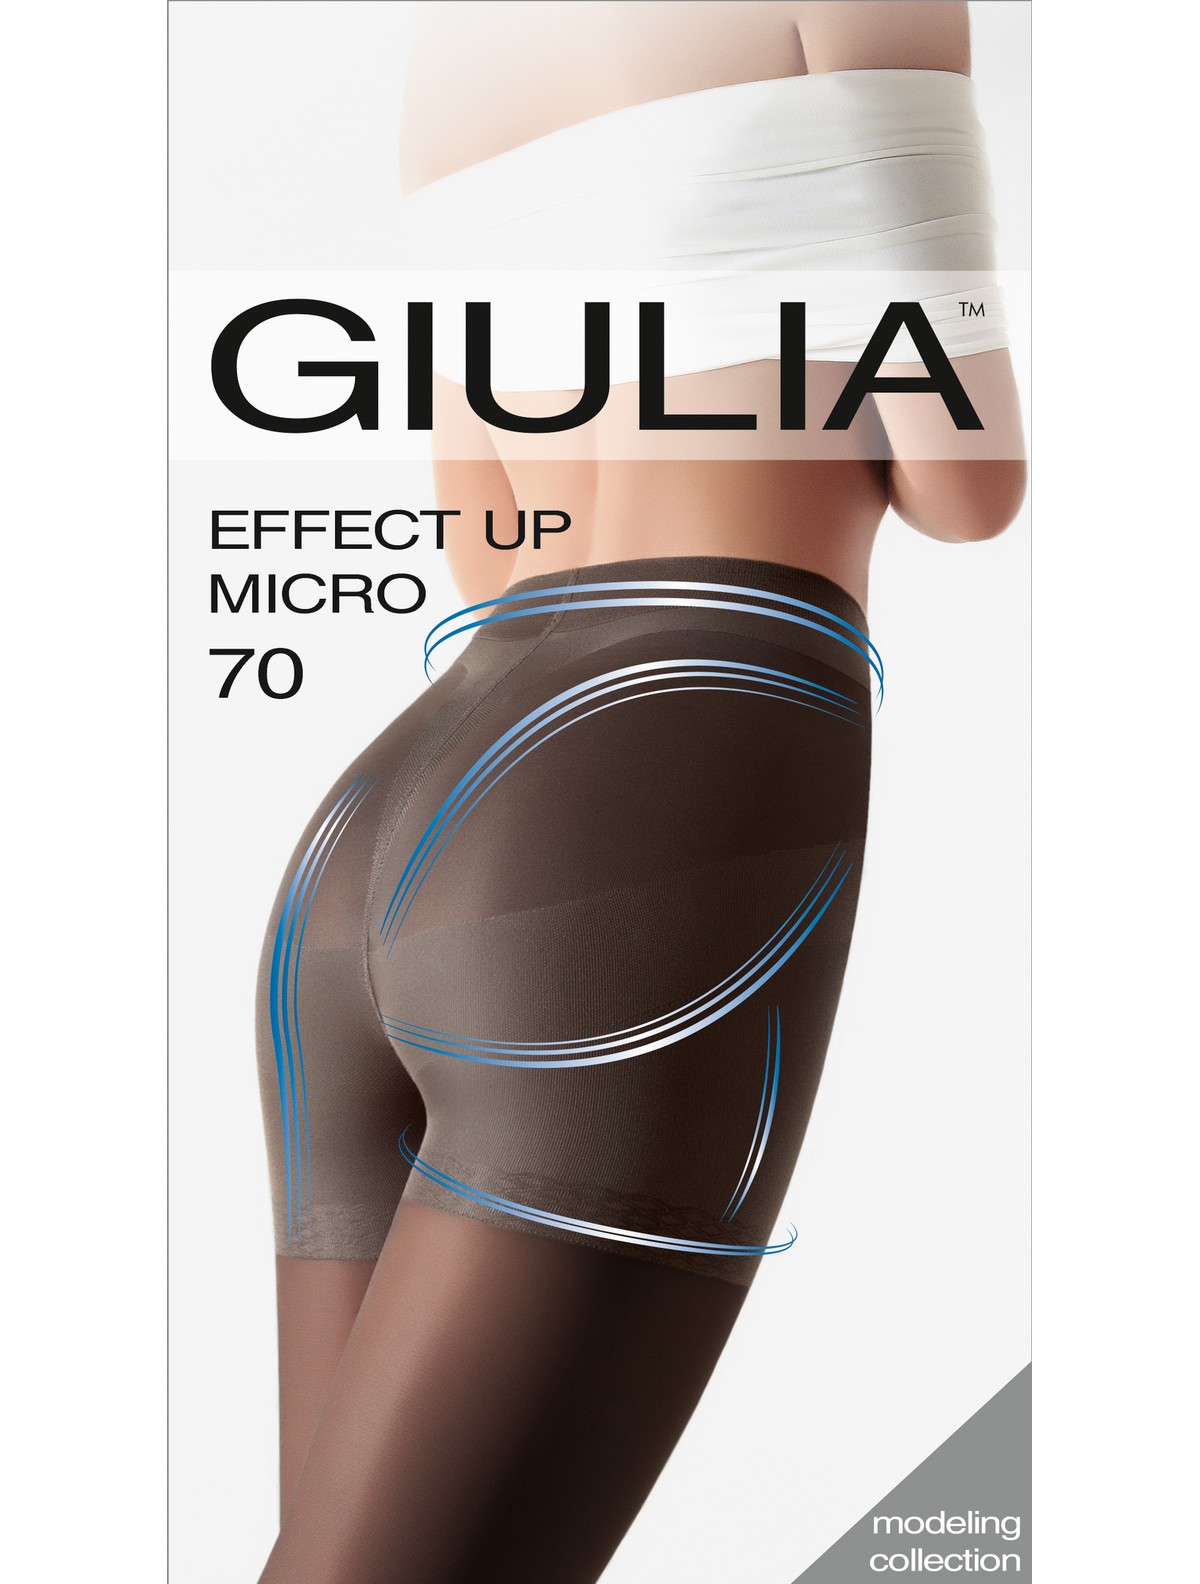 tights UP shaping GIULIA 70 EFFECT